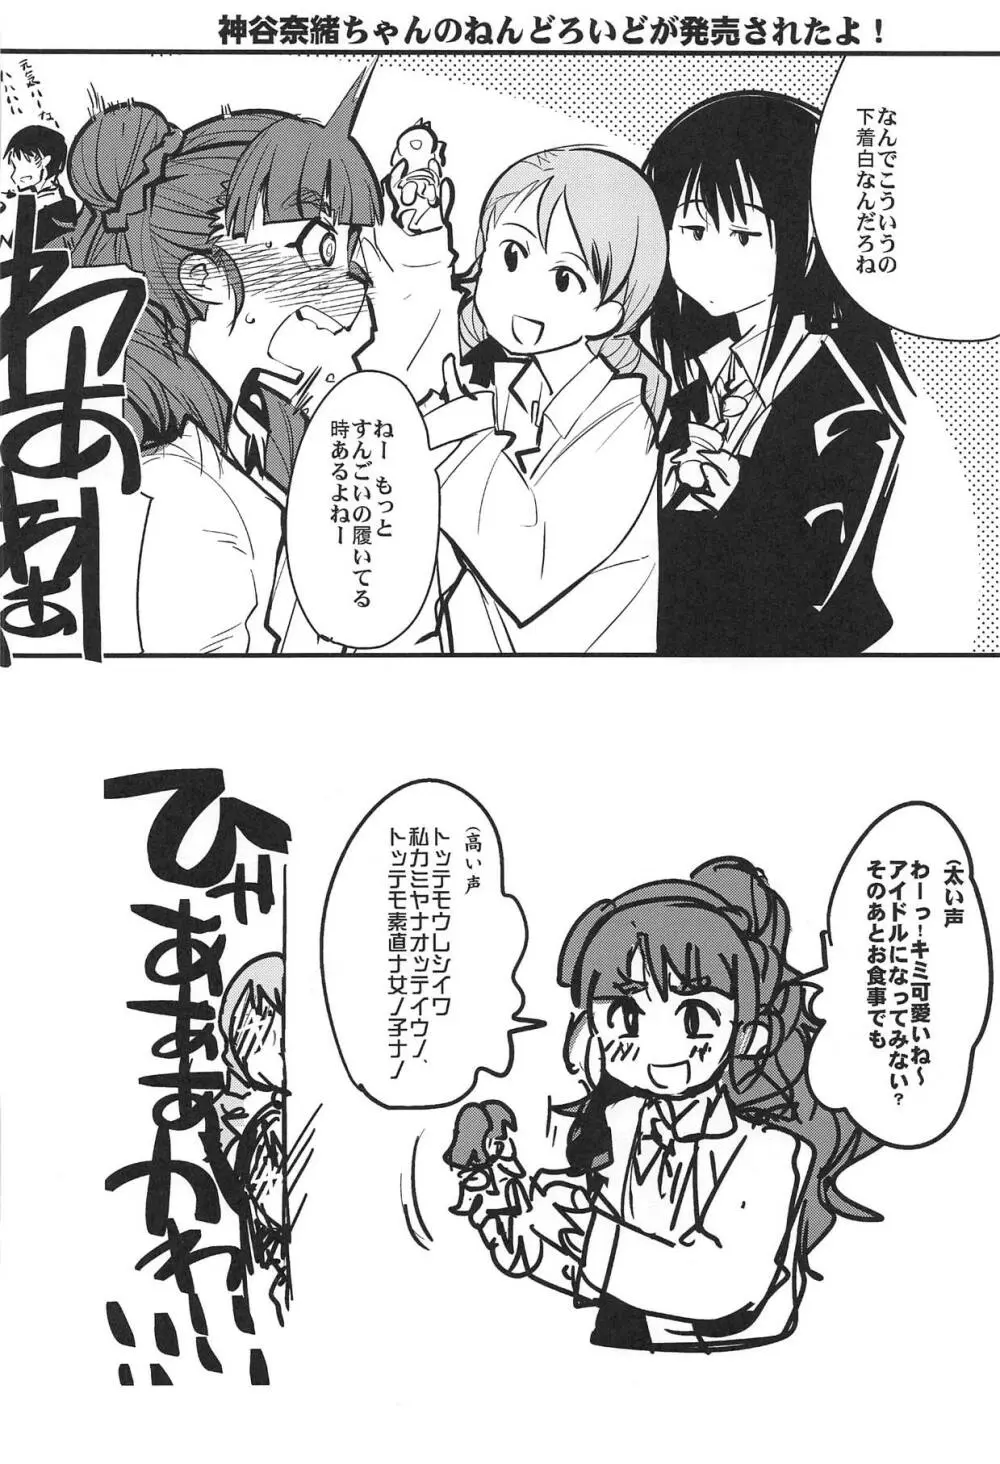 ALL TIME CINDERELLA 神谷奈緒 - page45